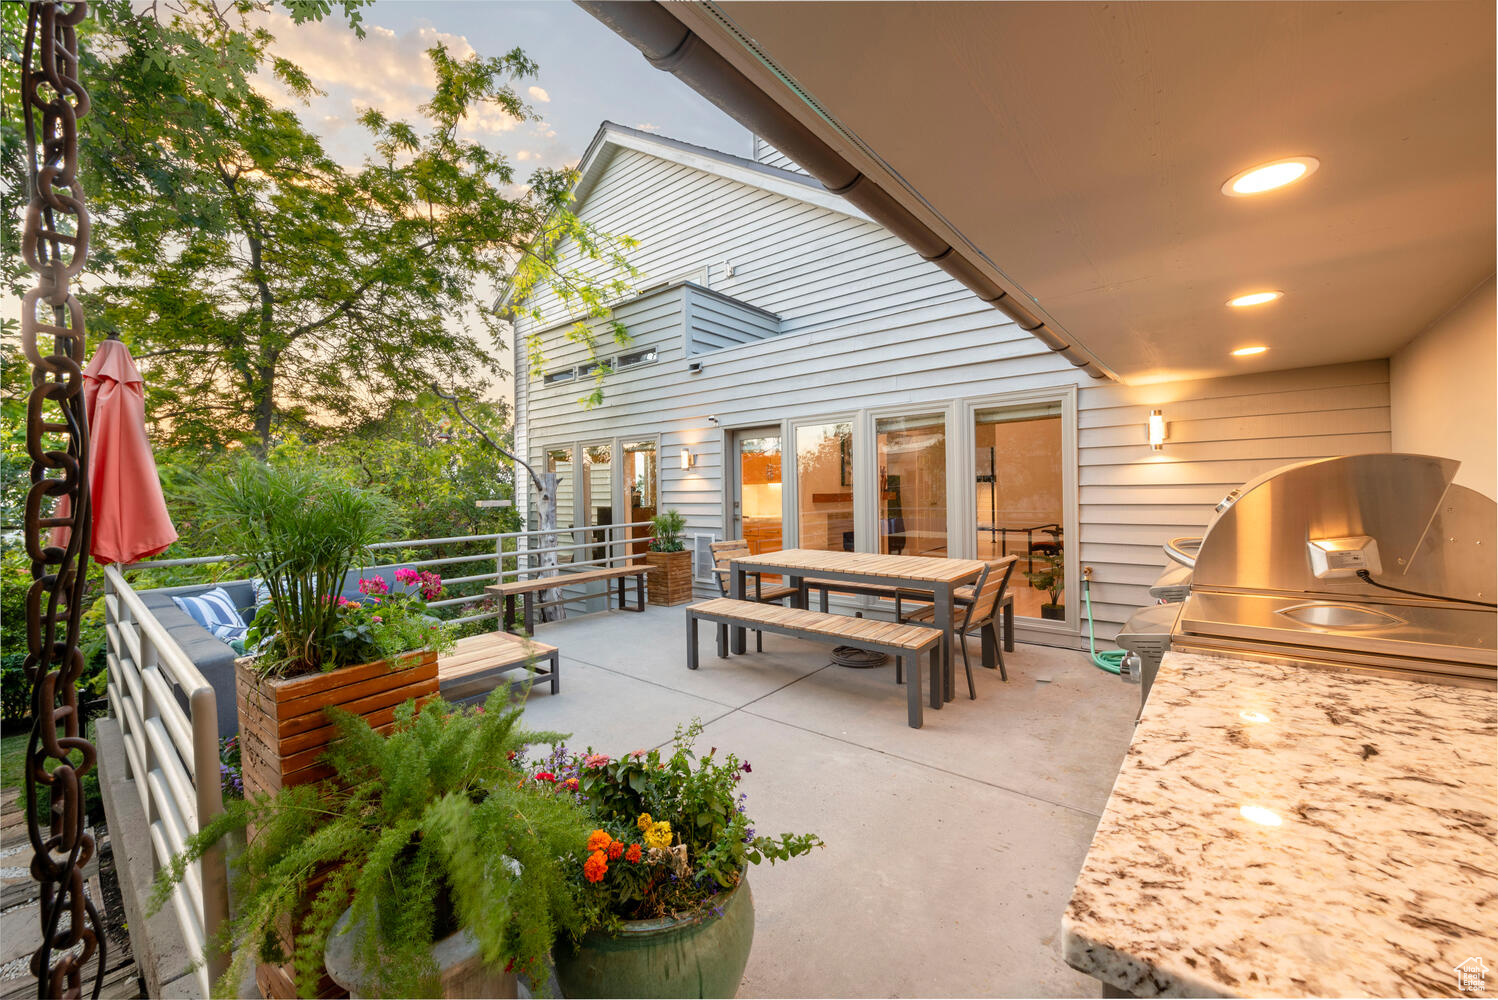 Patio at twilight featuring outdoor kitchen